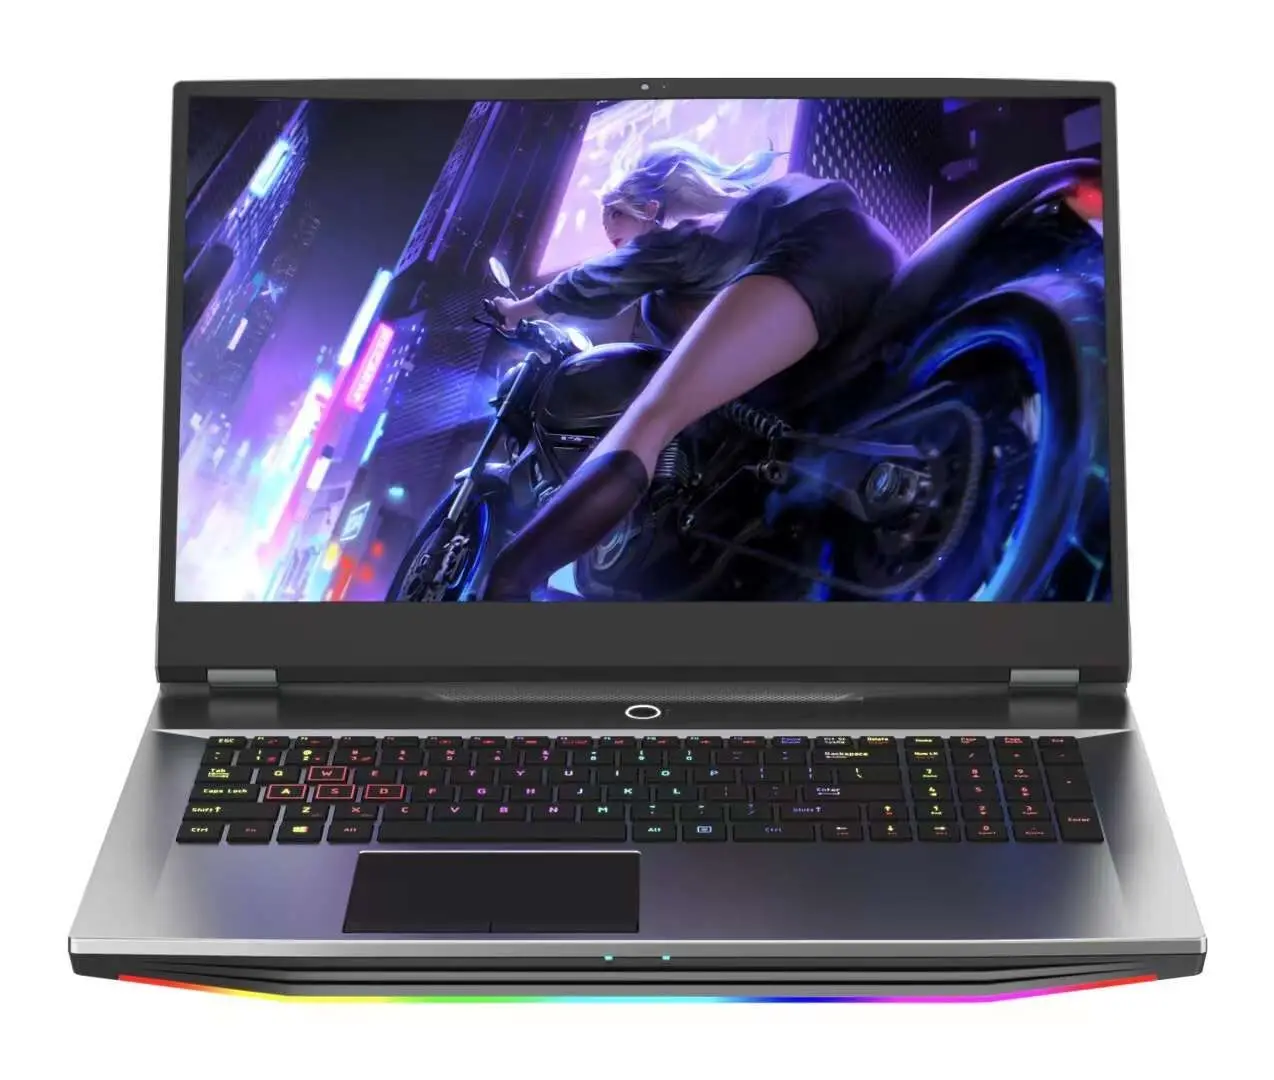 Wholesale laptop 17.3 inch E-sports screen Laptop for Game Big Screen 4GB discrete graphics card Laptop PC With SSD+HDD 2TB m.alibaba.com